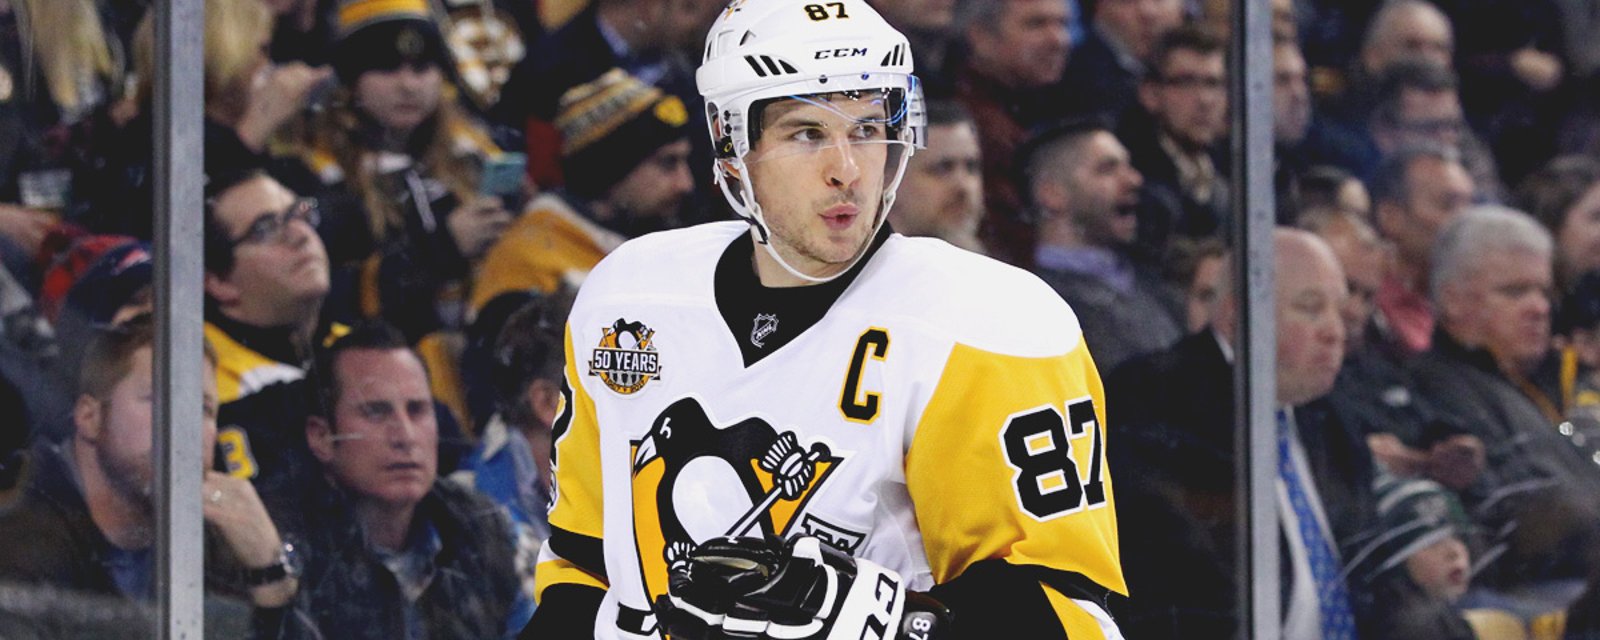 Watch: Crosby tips in power-play goal